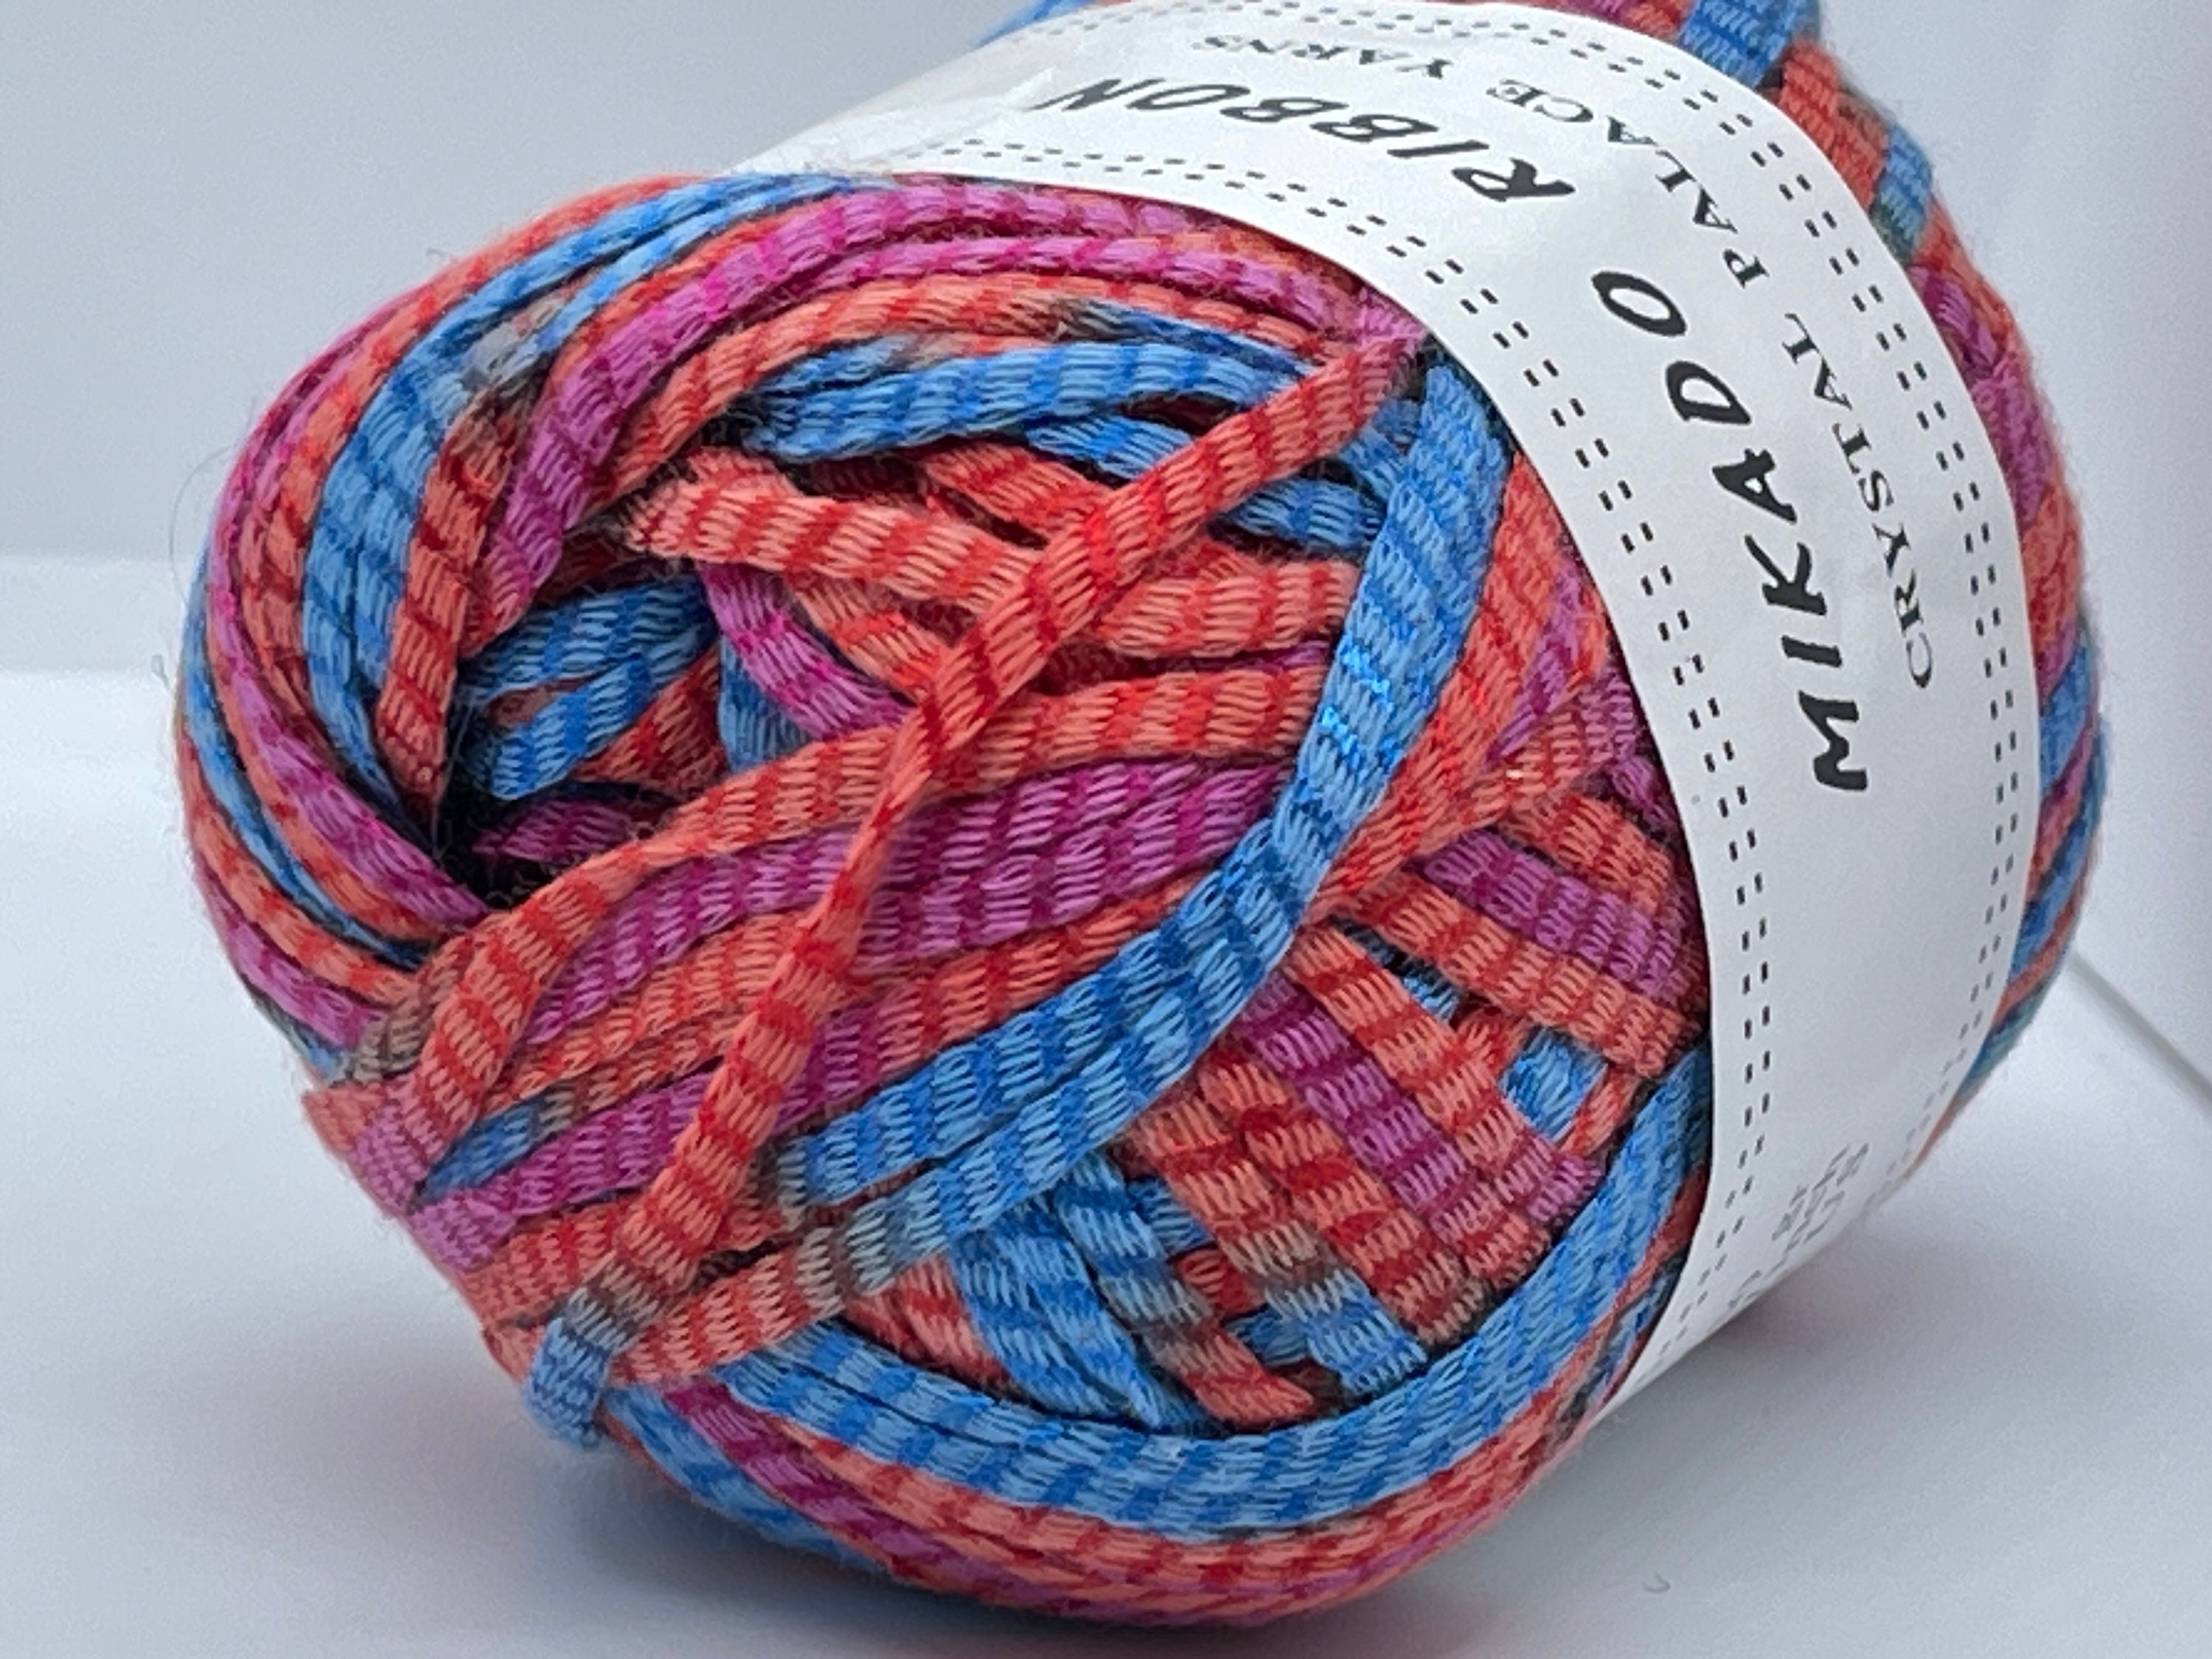 Monterey all cotton mercerized worsted weight yarn from Crystal Palace Yarns,  free shipping offer